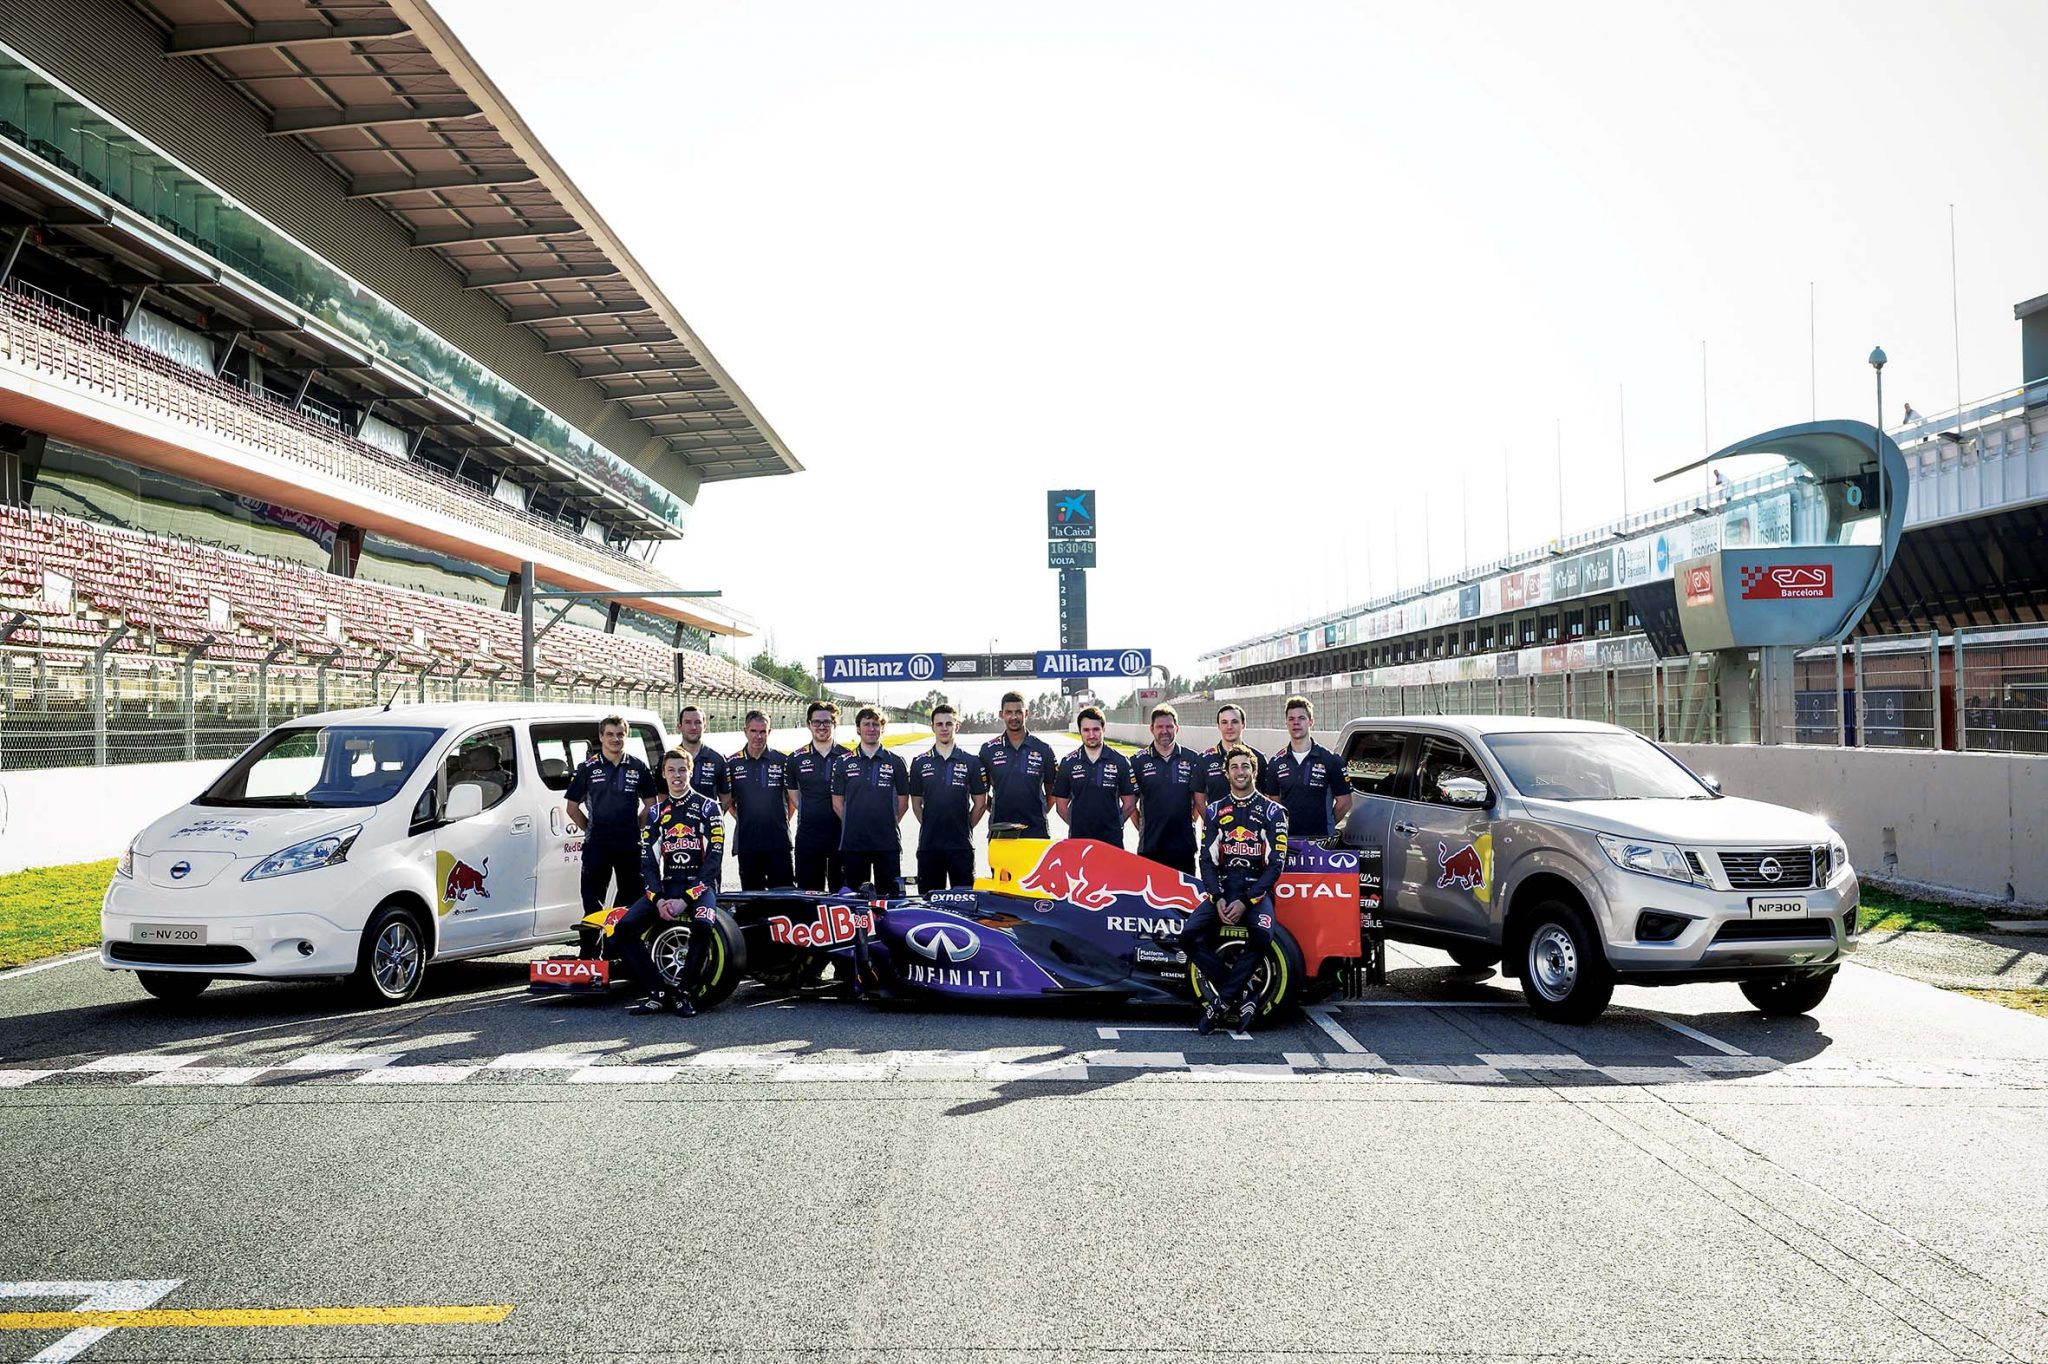 IRBR Team with Nissan LCV at Barcelona_Spain_2